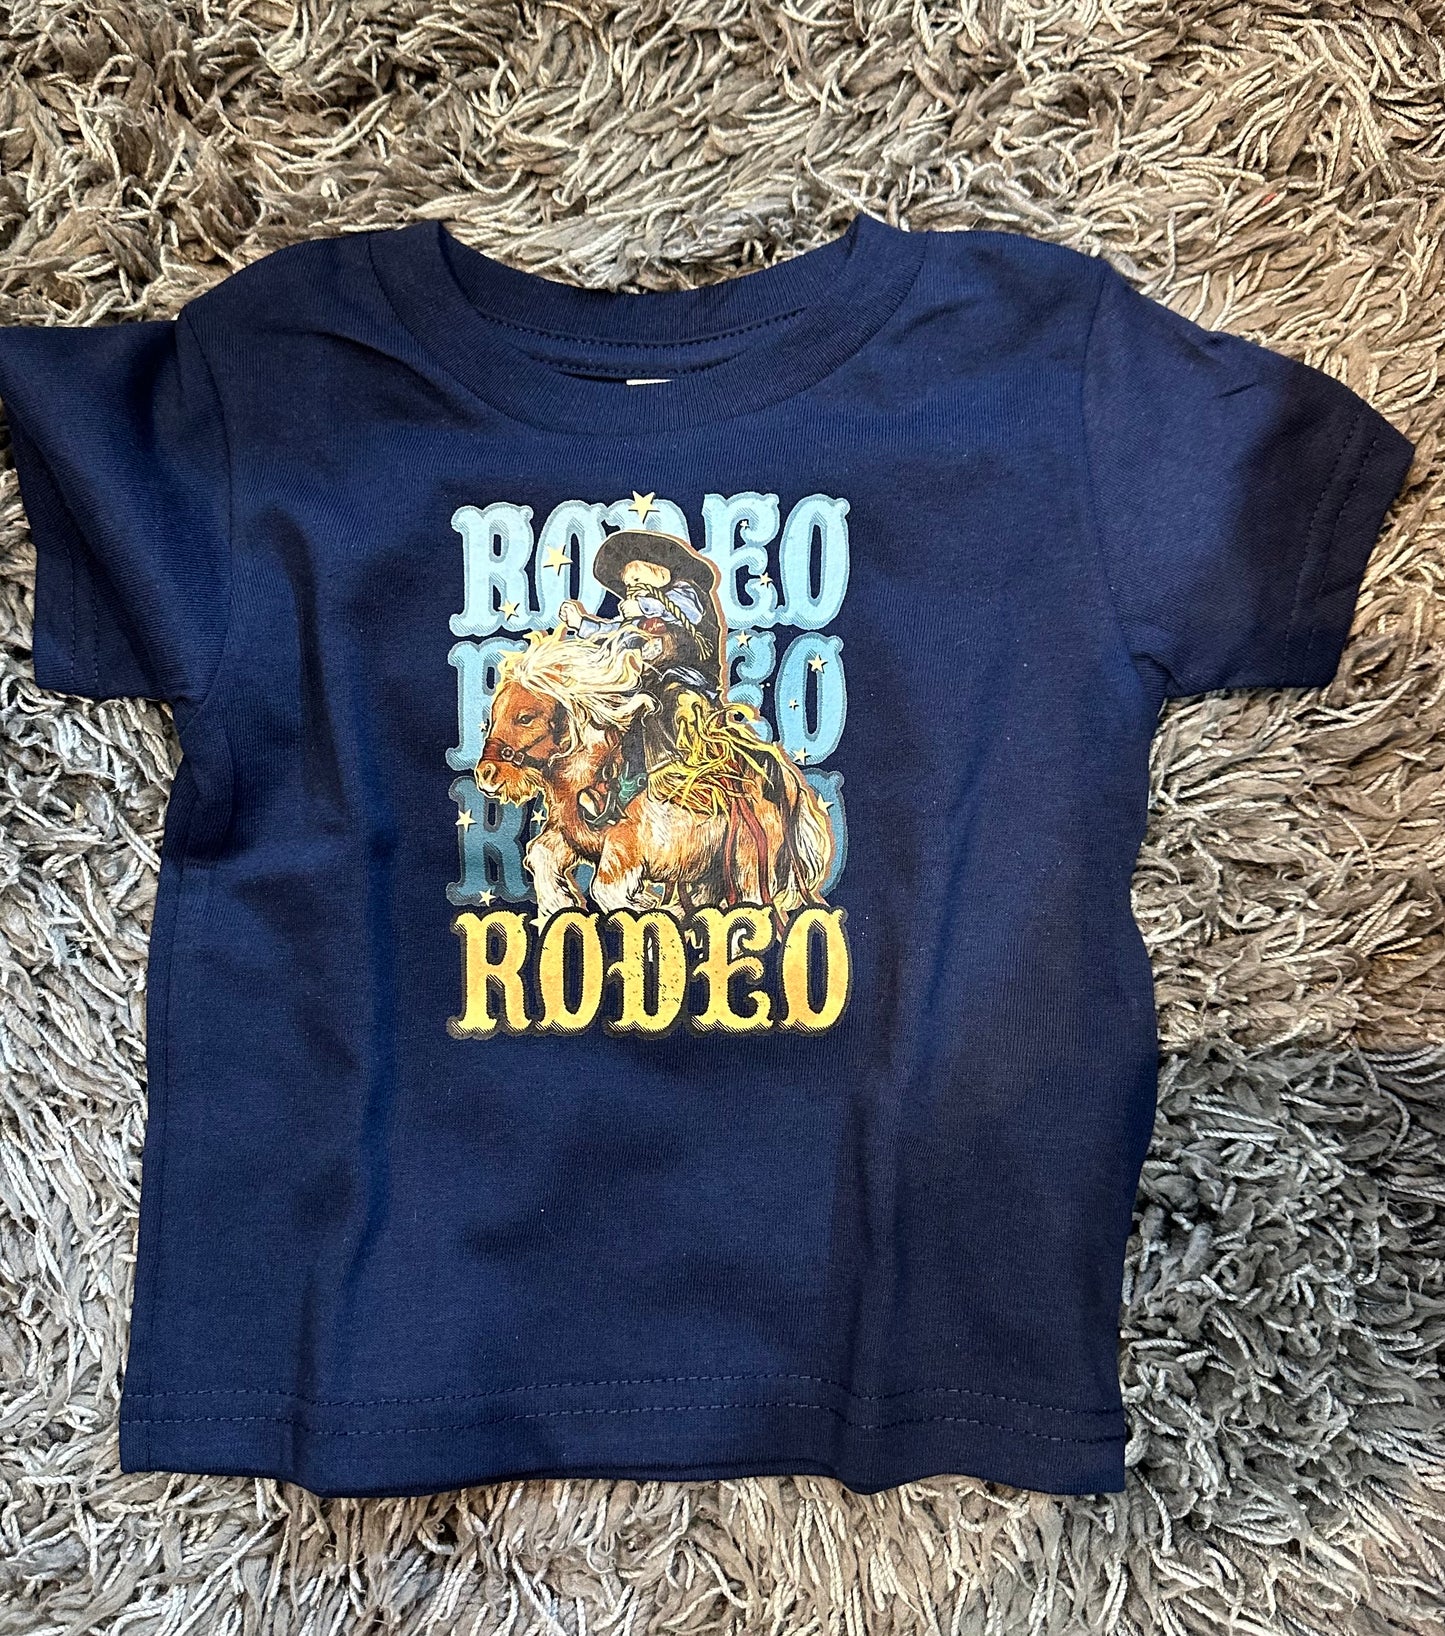 RODEO, RODEO, RODEO.. Toddler Tee